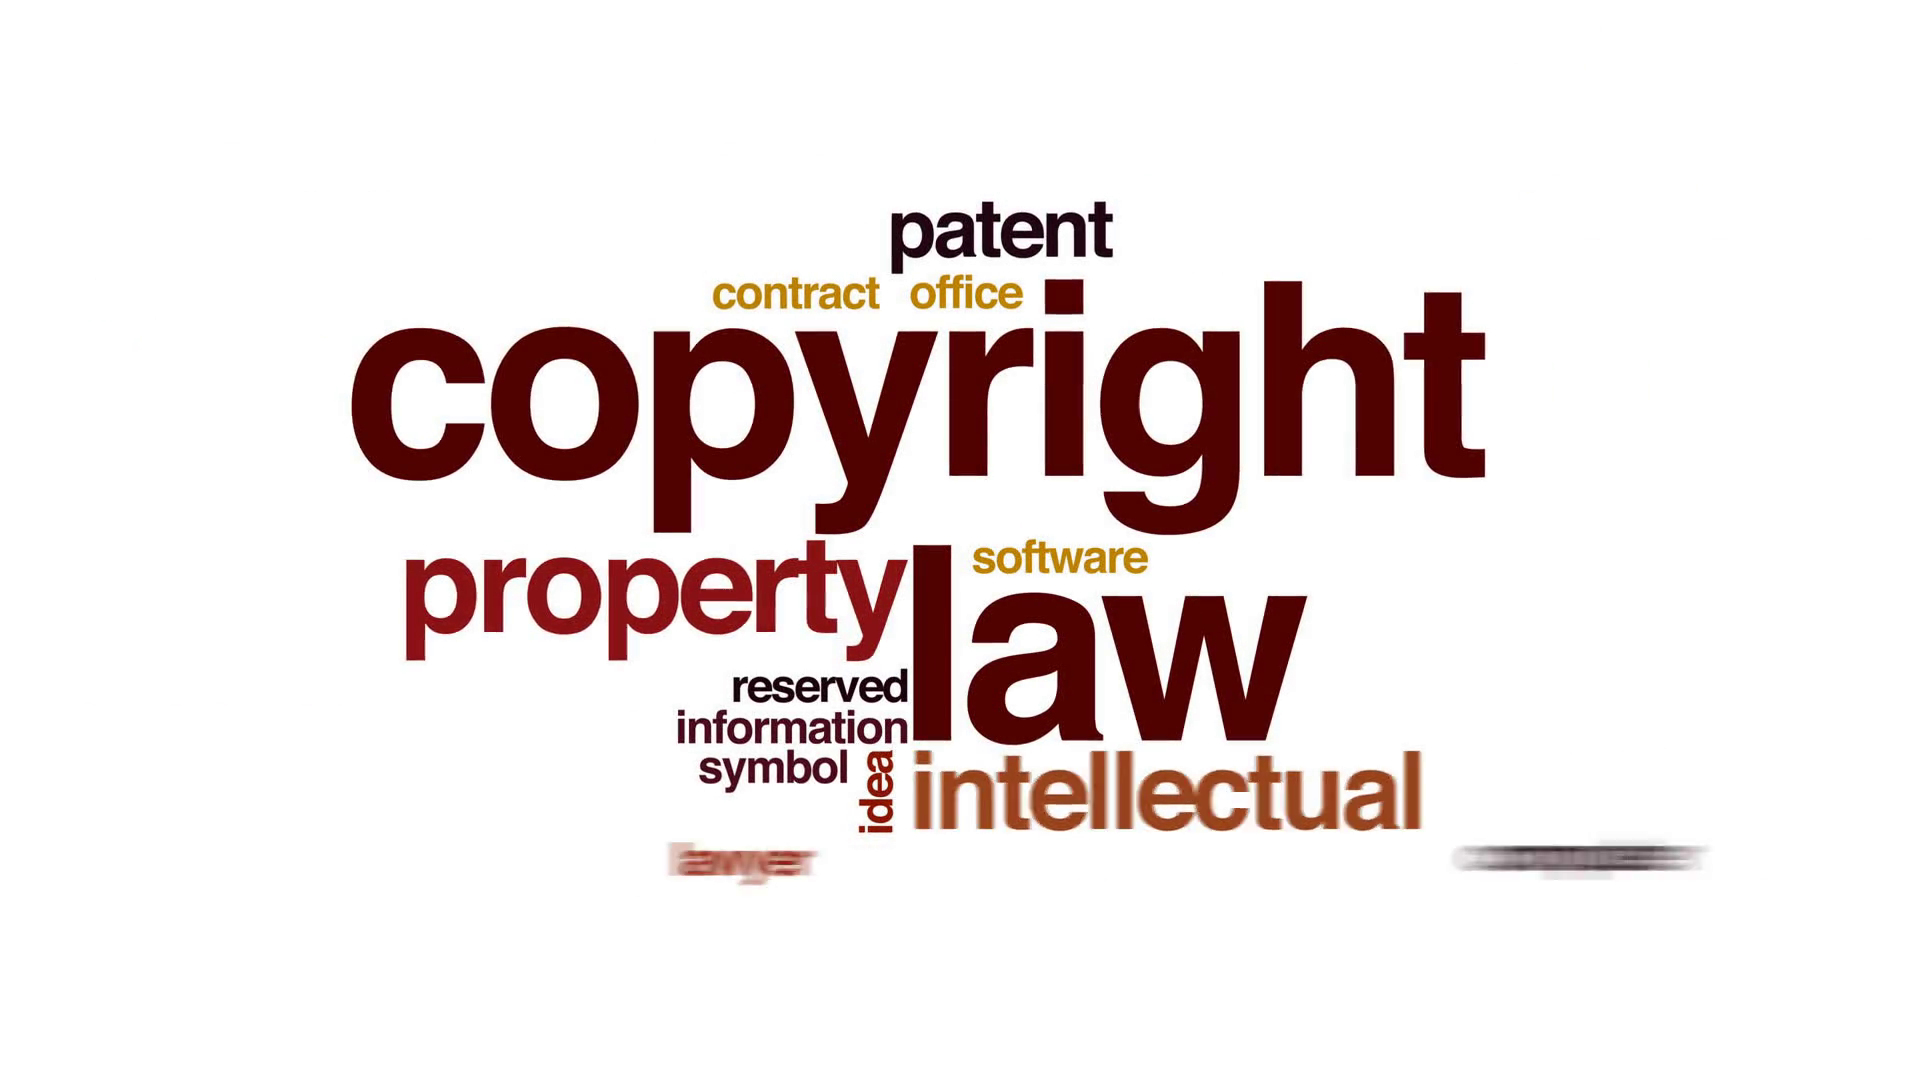 Entertainment Industry And Intellectual Property Protection in India